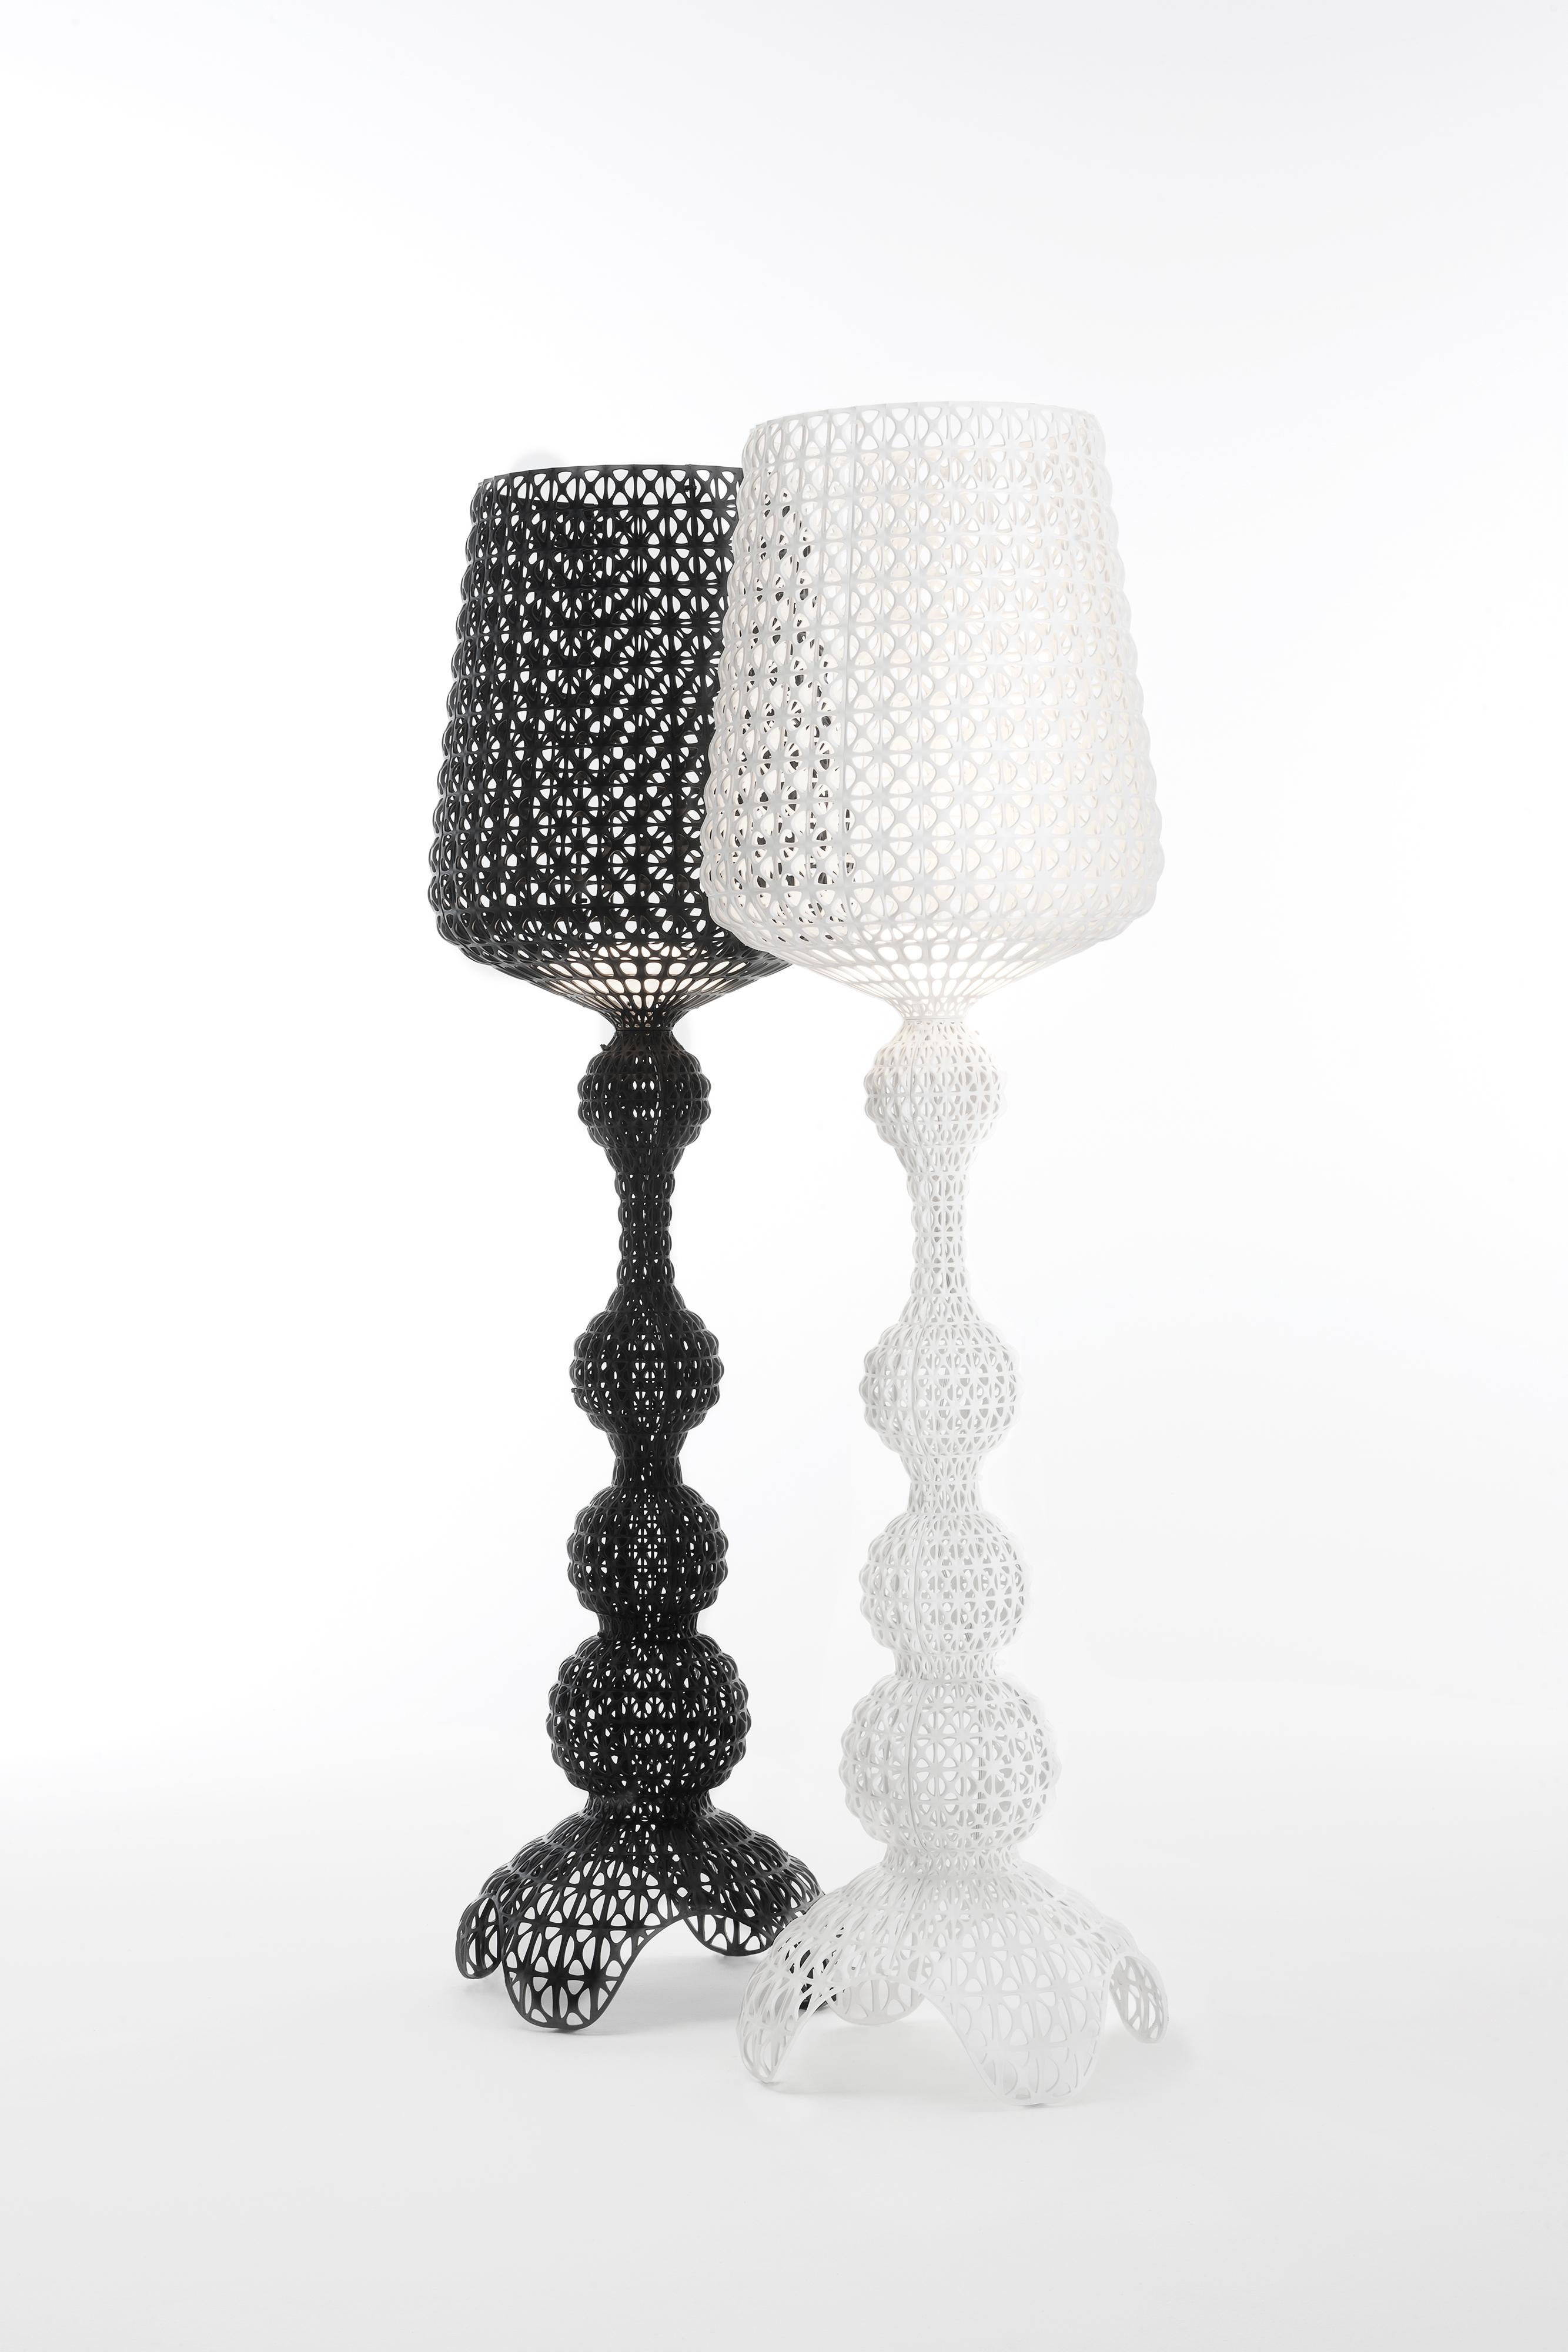 The Kabuki floor lamp is injection moulded. The sophisticated injection technology used makes it possible to crate a woven structure similar to lace with a unique perforated surface through which the light is diffused.

Dimensions: Height: 65.33